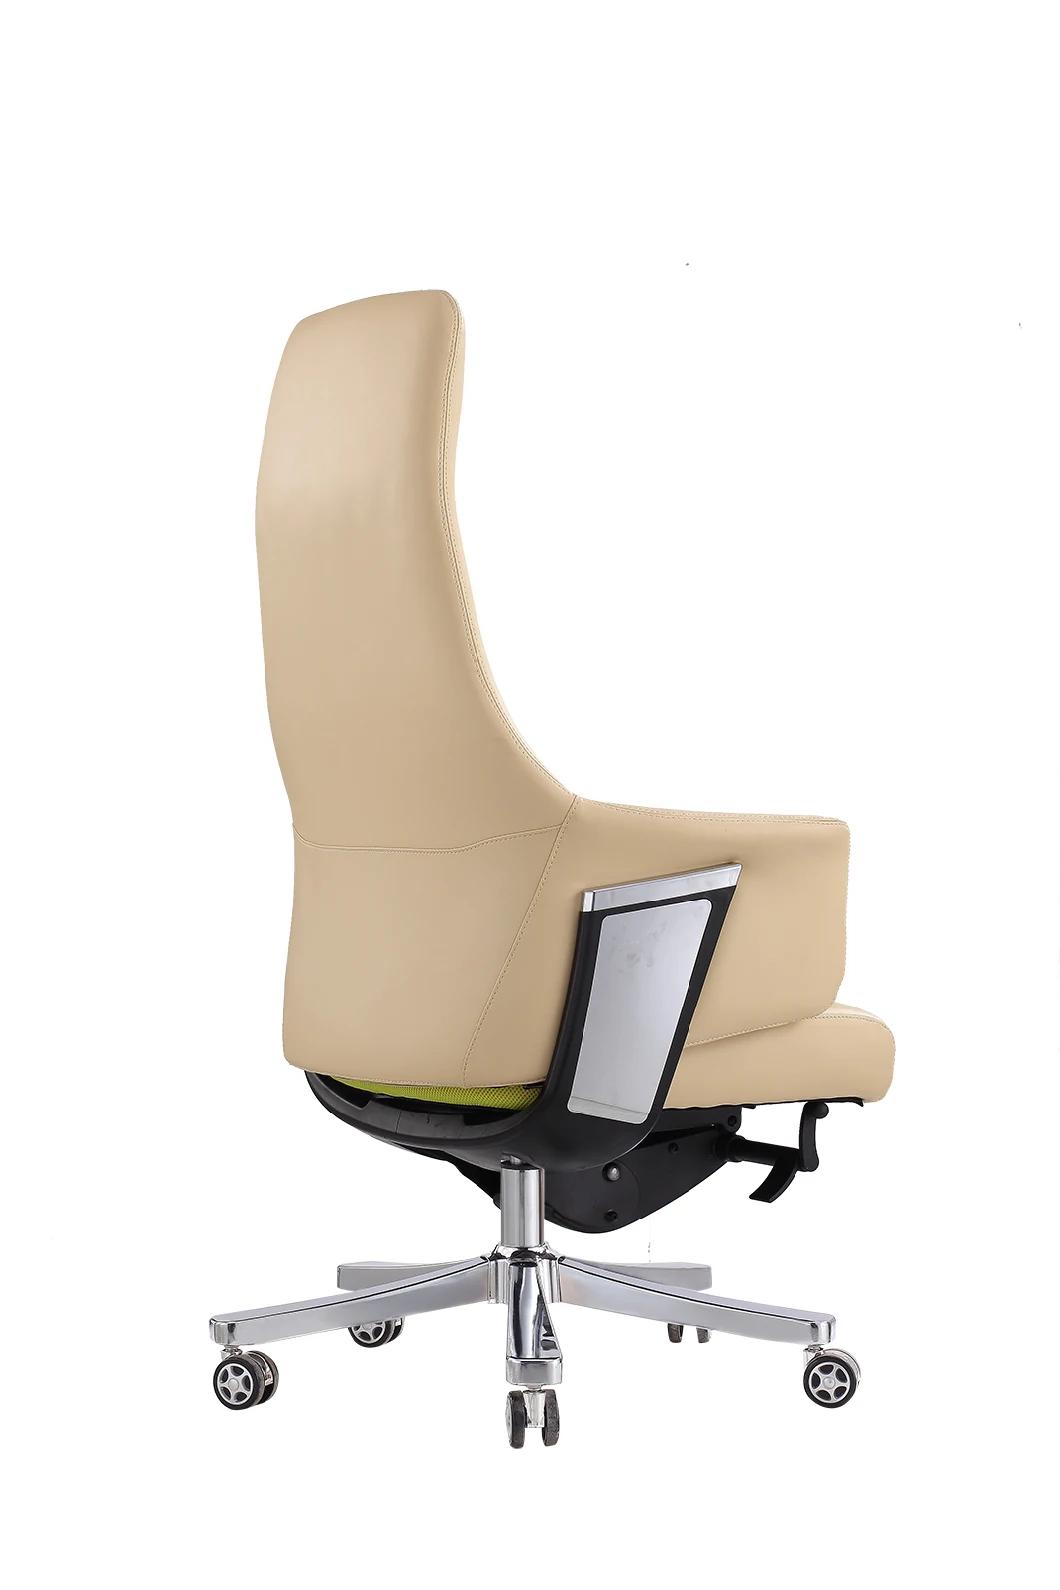 High Quality Furniture Leather Luxury Multi Functional Modern CEO Manager Swivel Office Executive Computer Chair